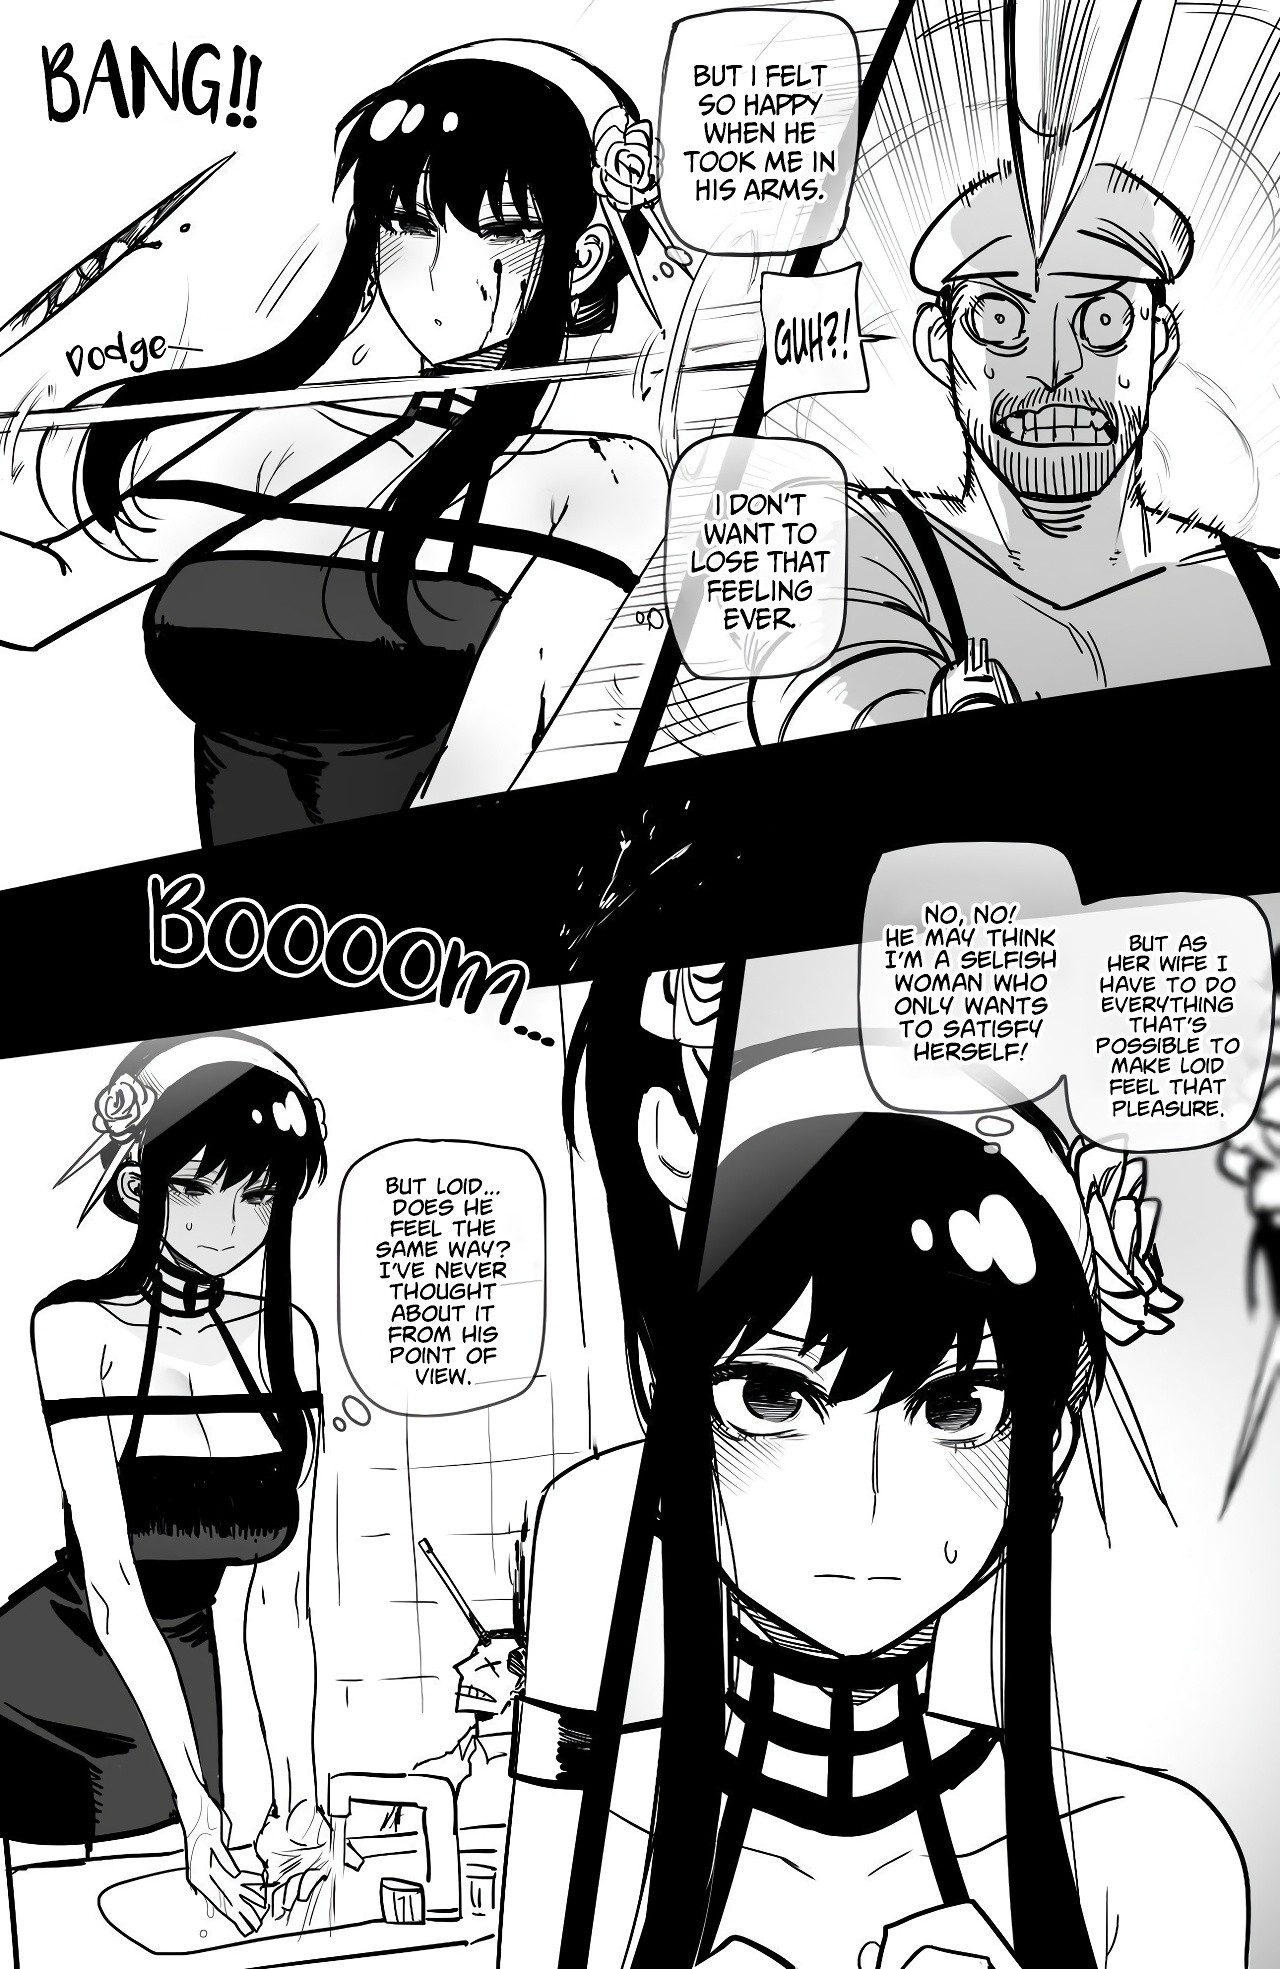 Spy x Sex - After Story hentai manga picture 5